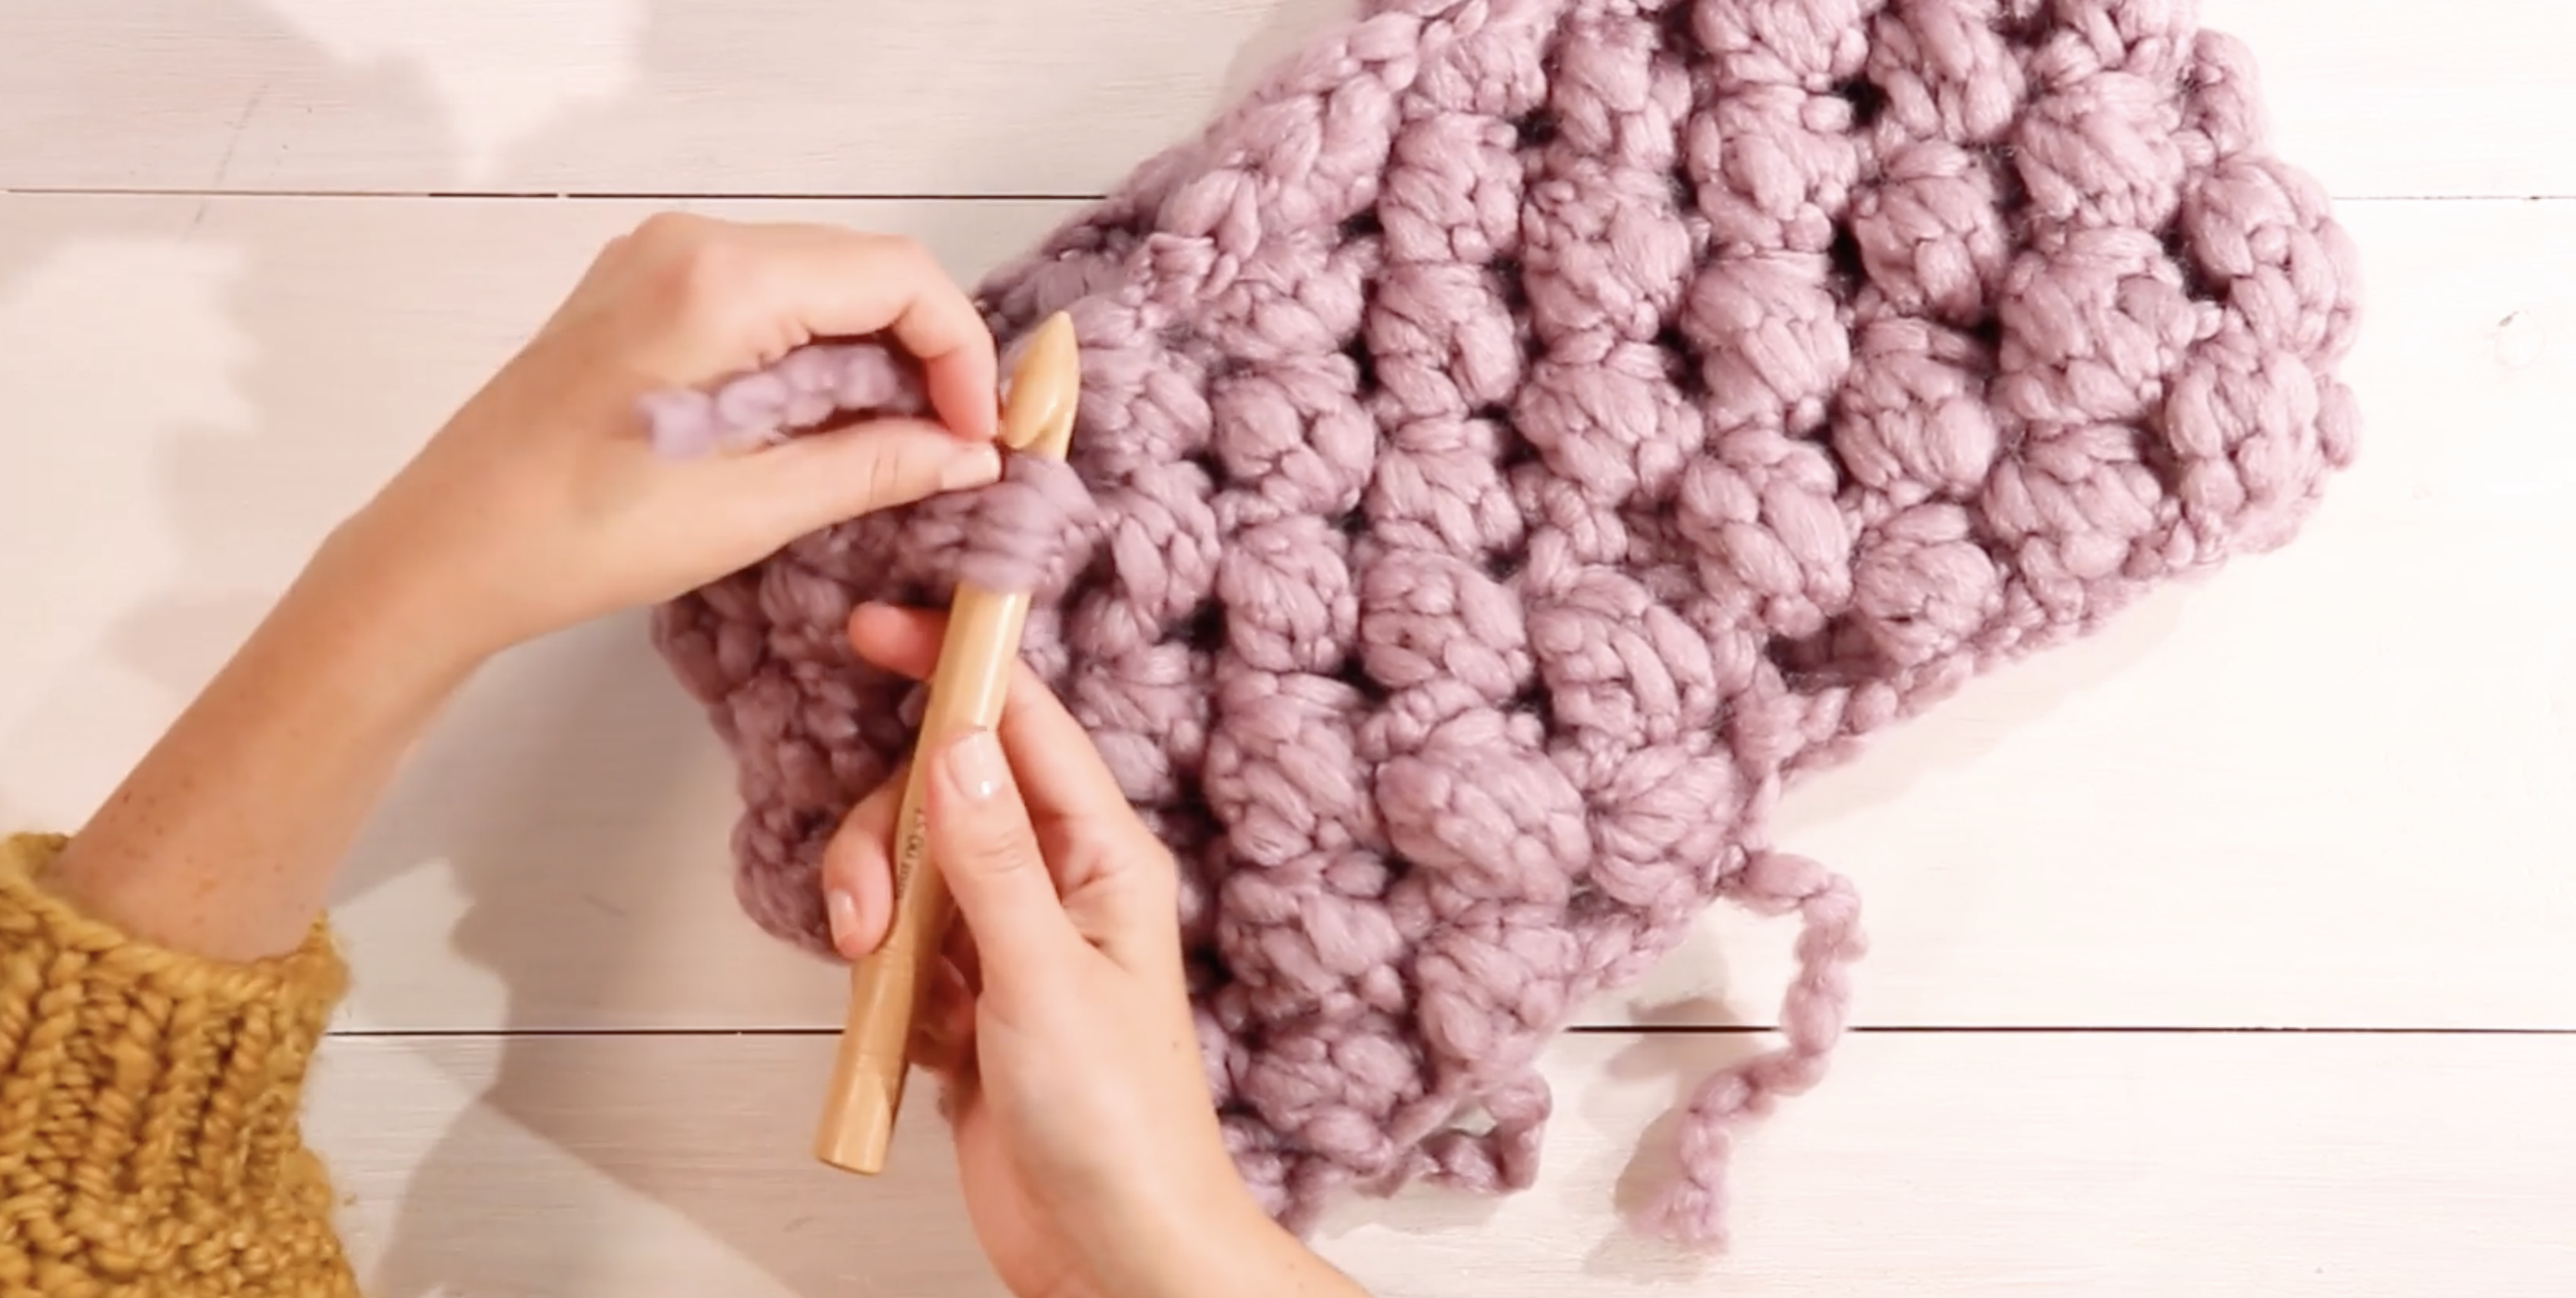 Crochet Your Own Bobble Cowl With These Simple Step-by-Step Instructions